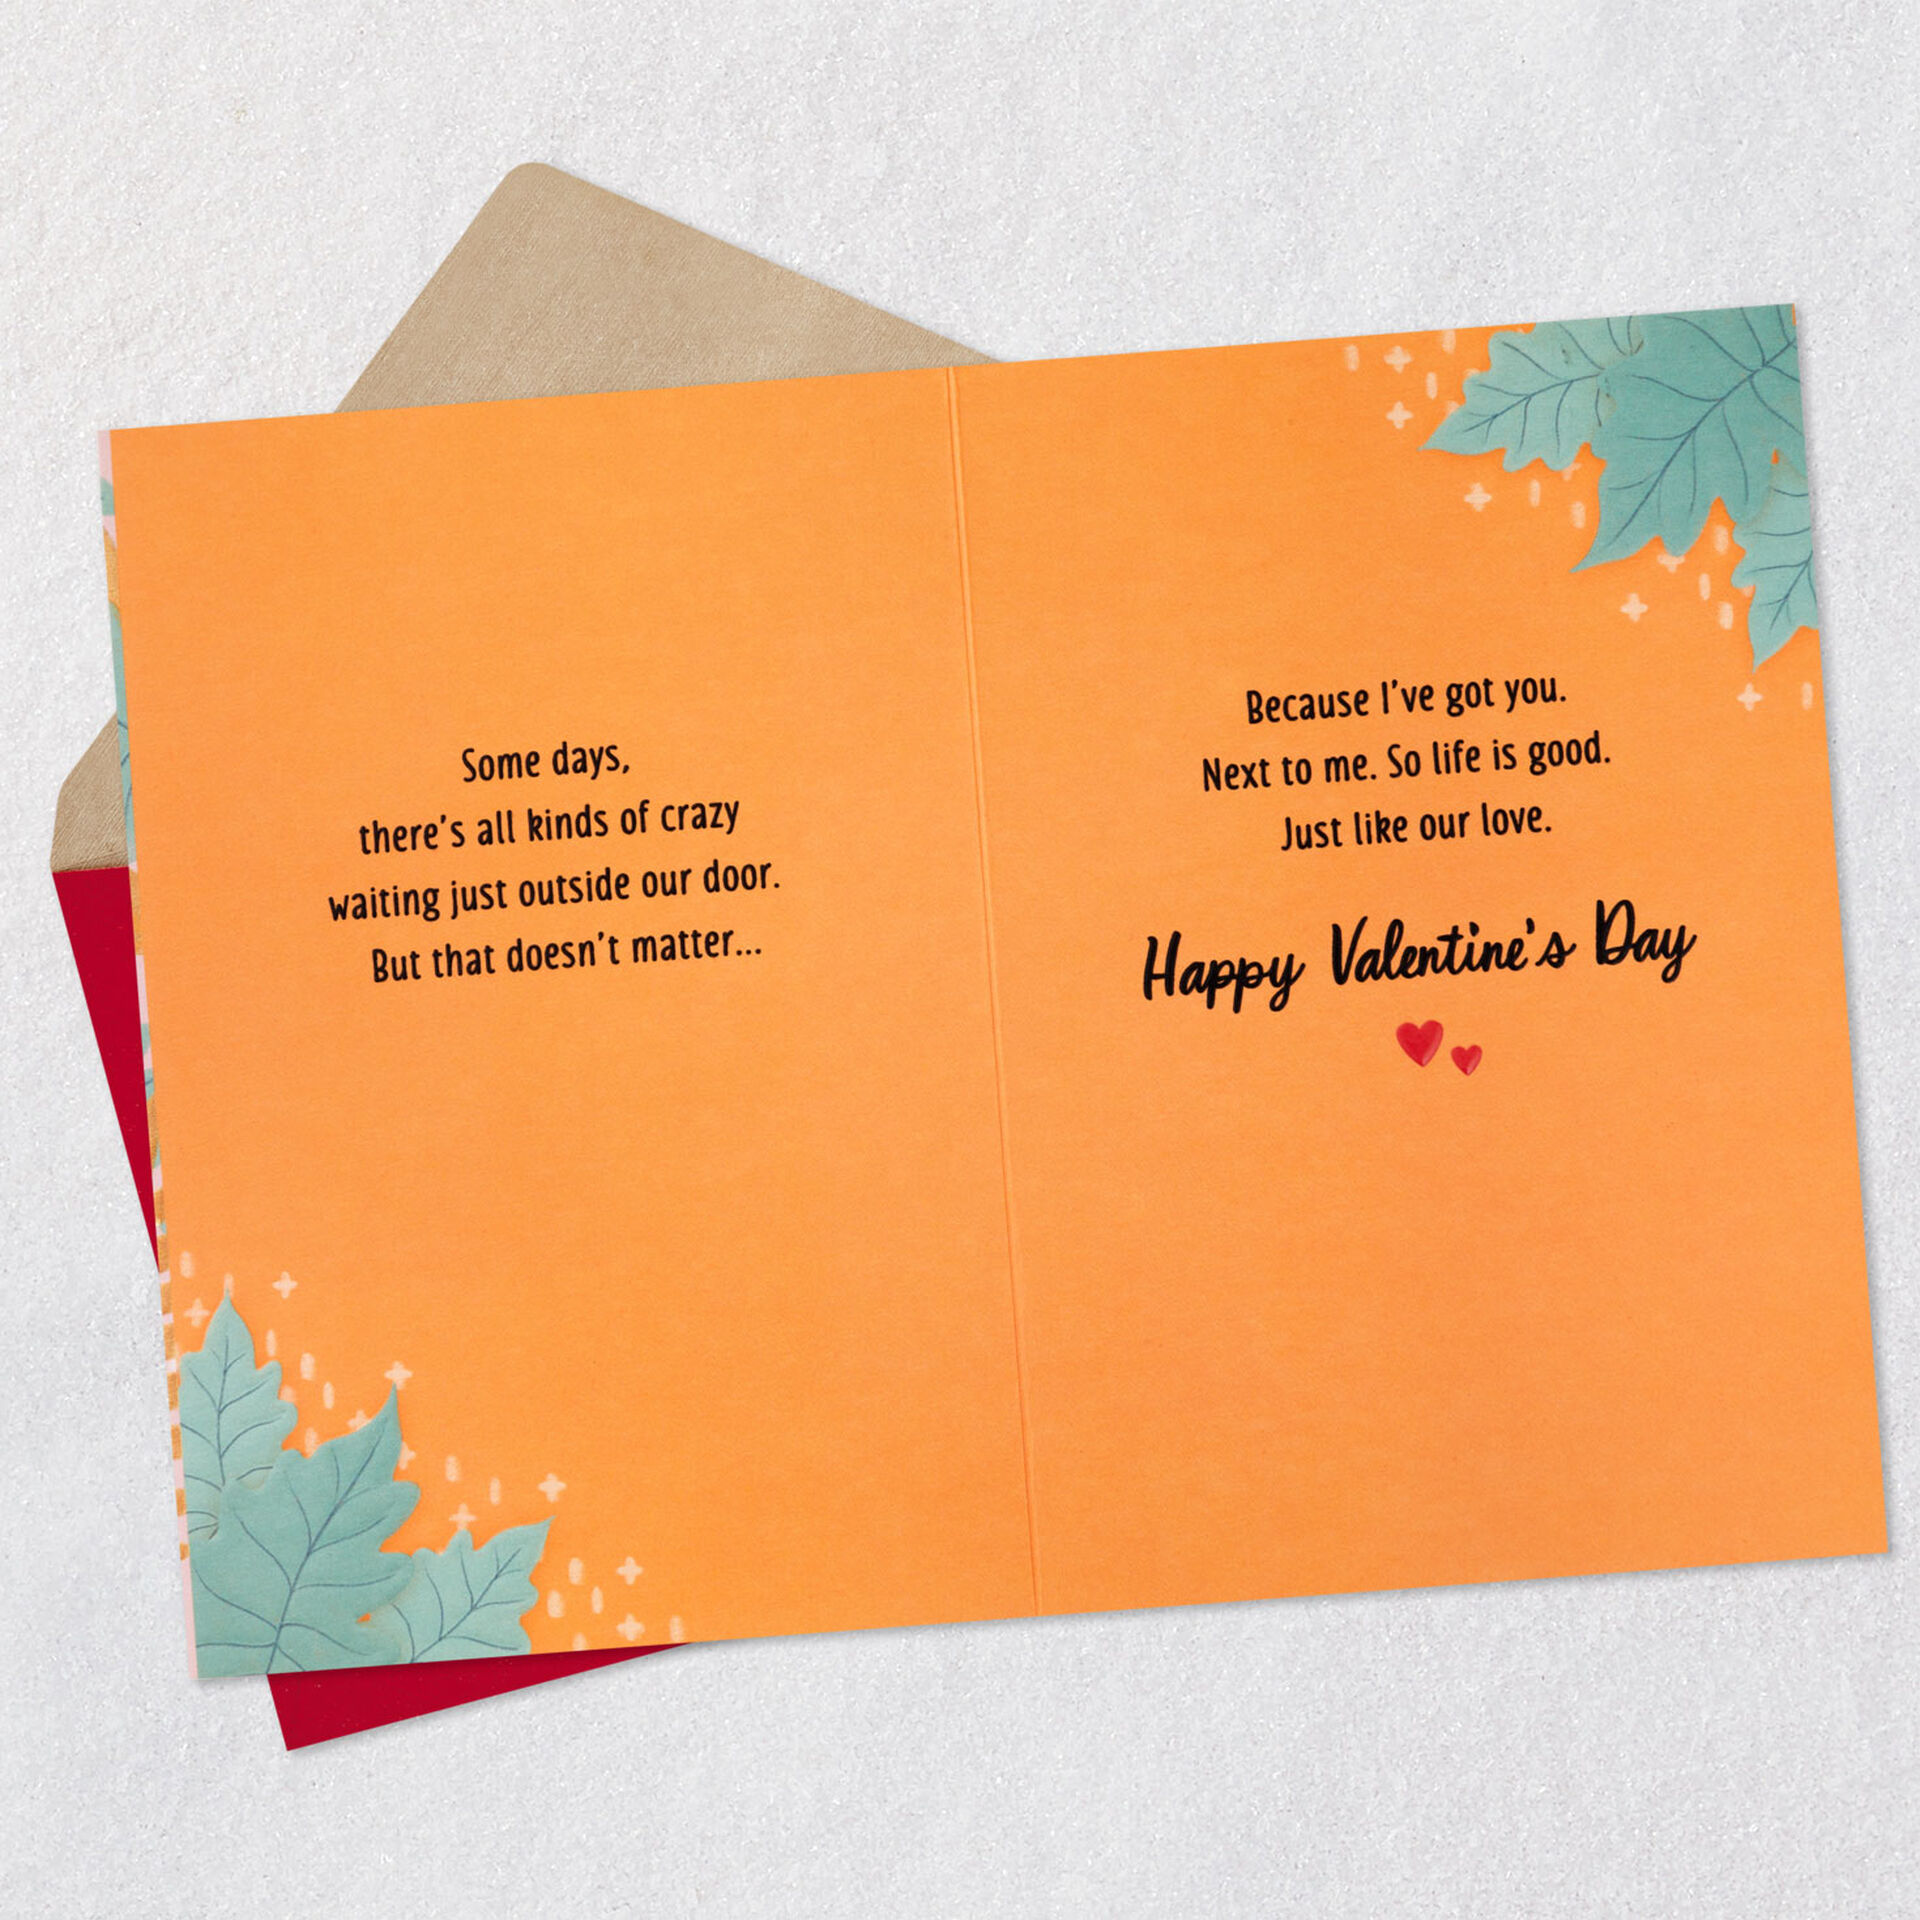 Man-and-Woman-Smiling-Romantic-Valentines-Day-Card_399SV6083_04